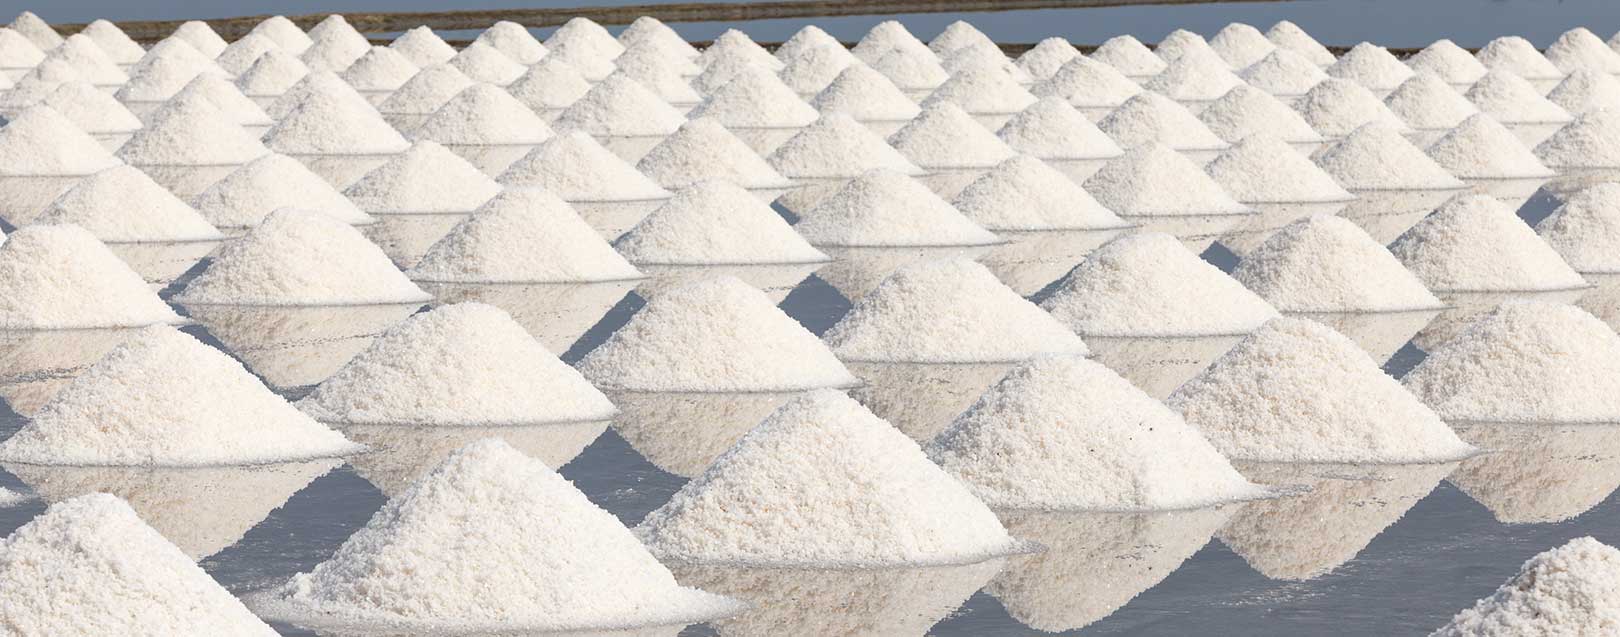 No shortage of salt in the country; price ruling normal: Govt